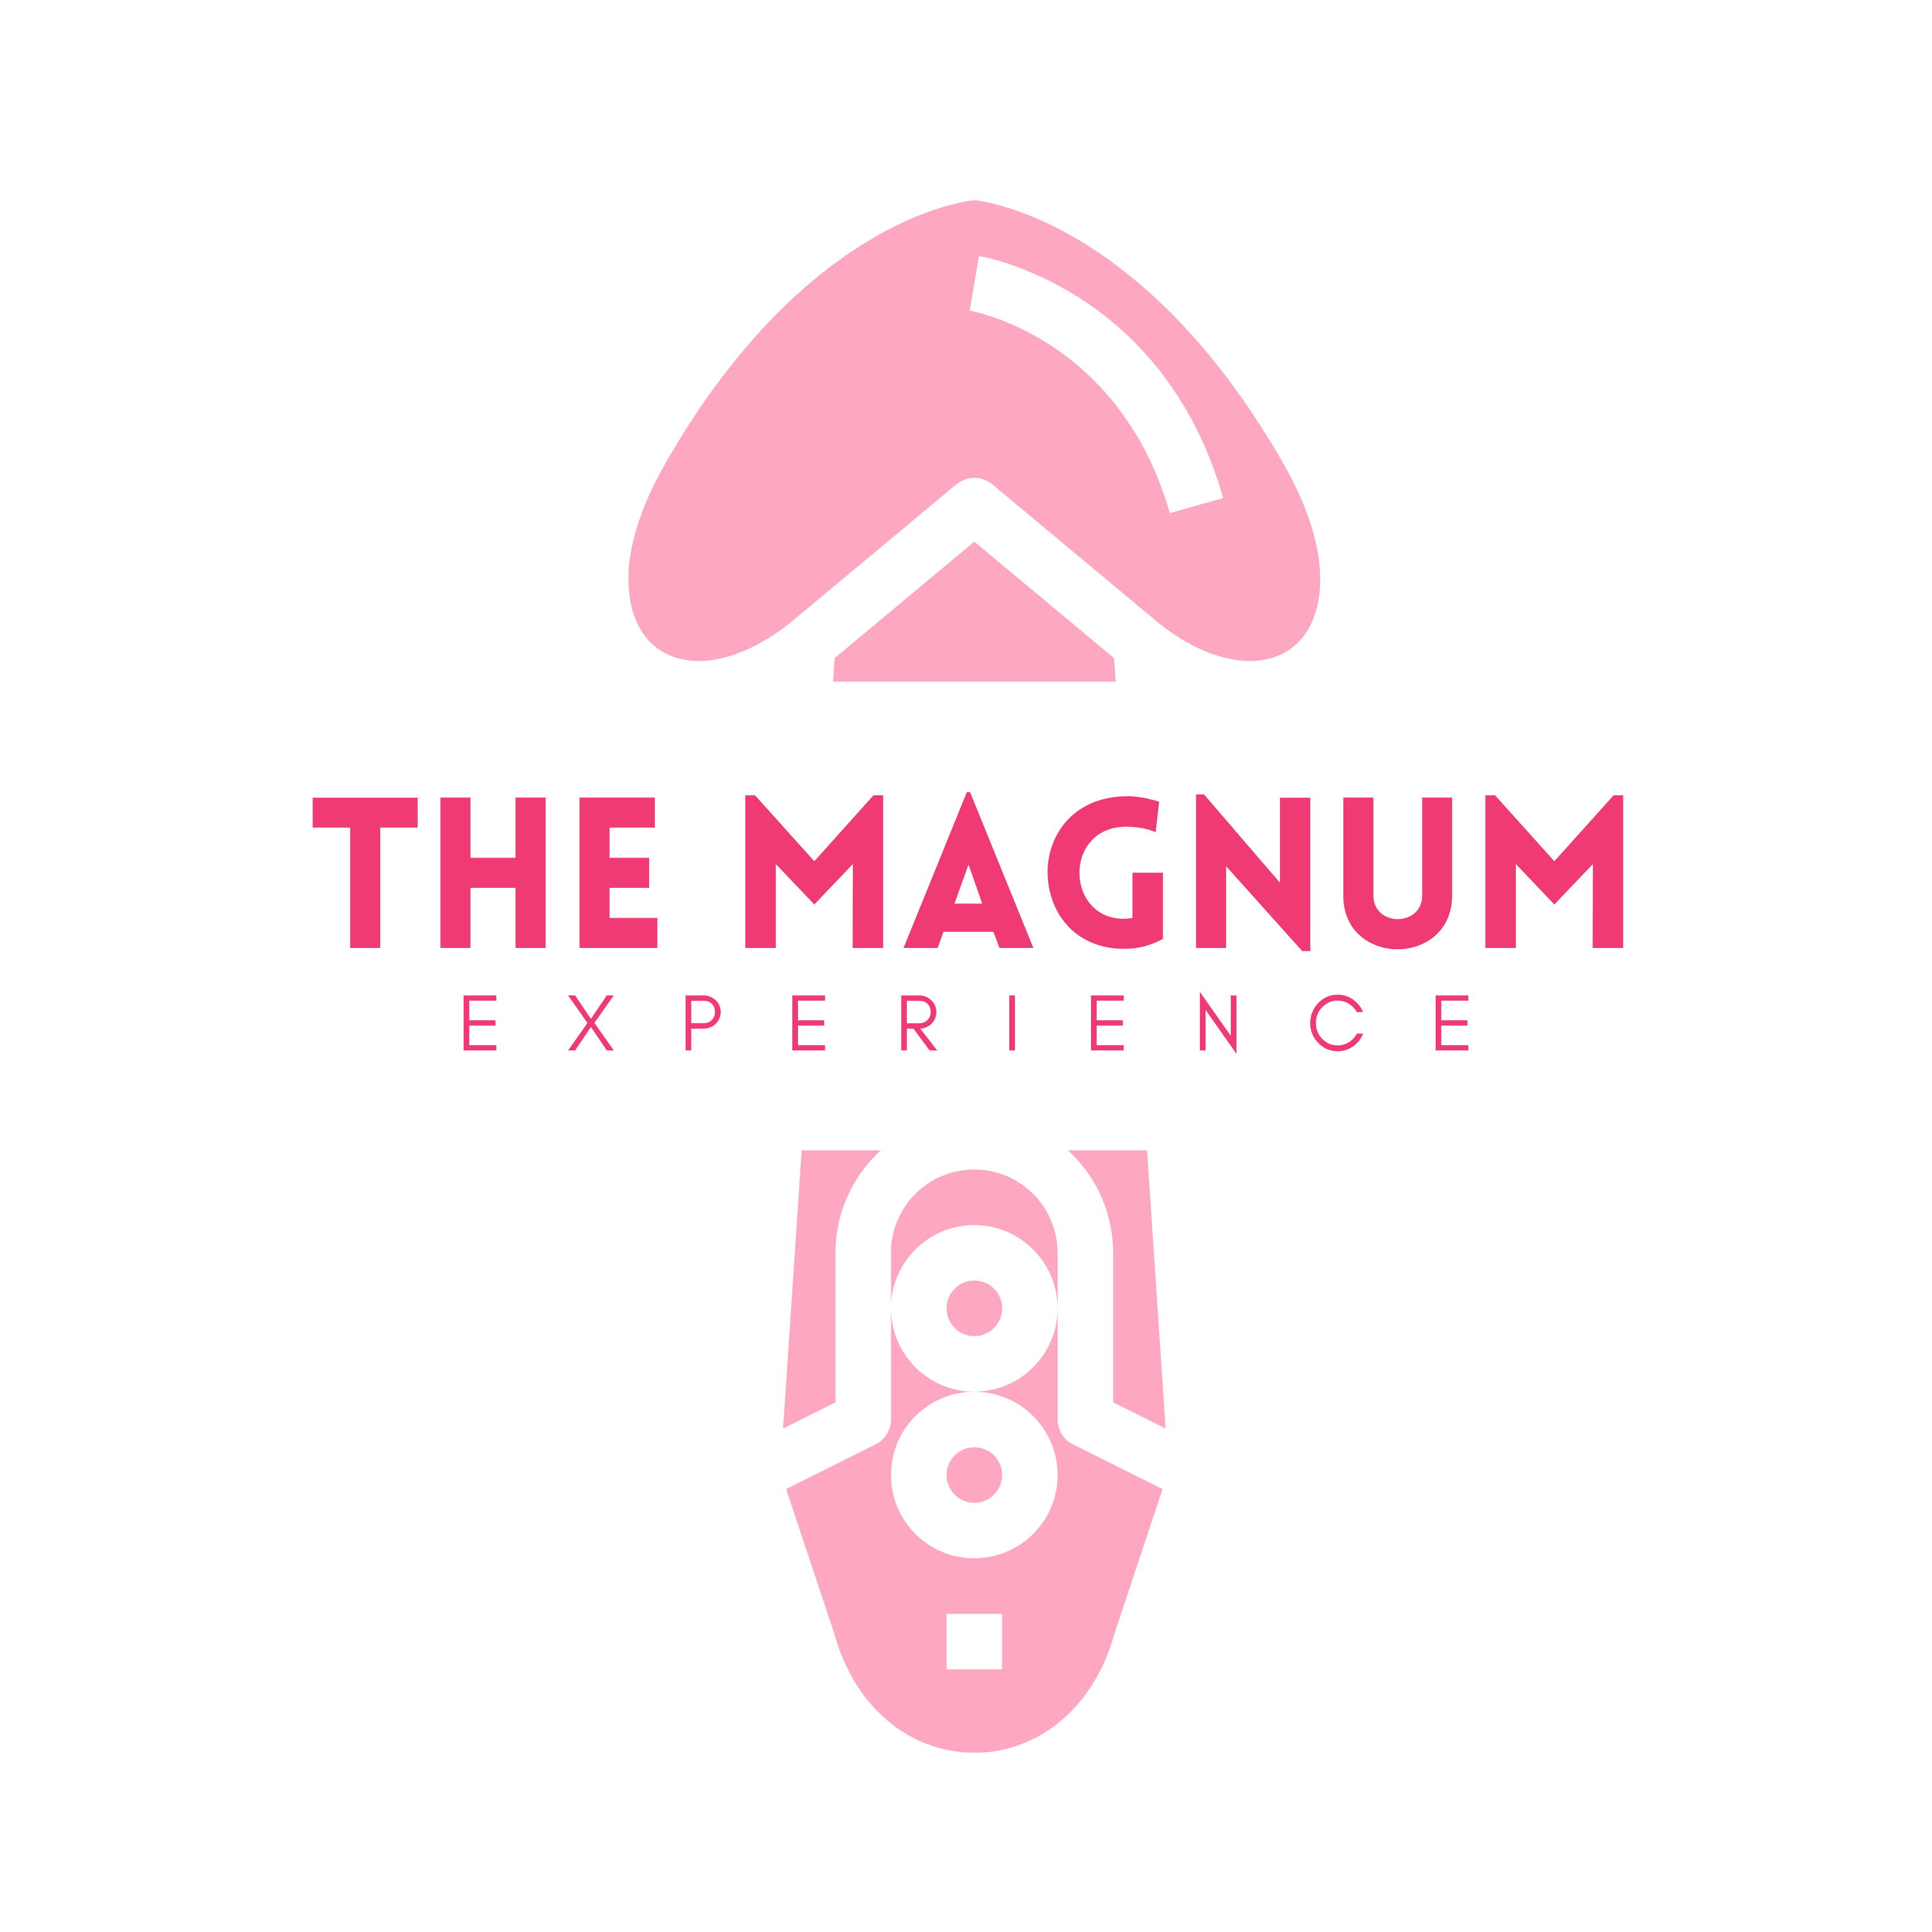 TheMagnumExperience